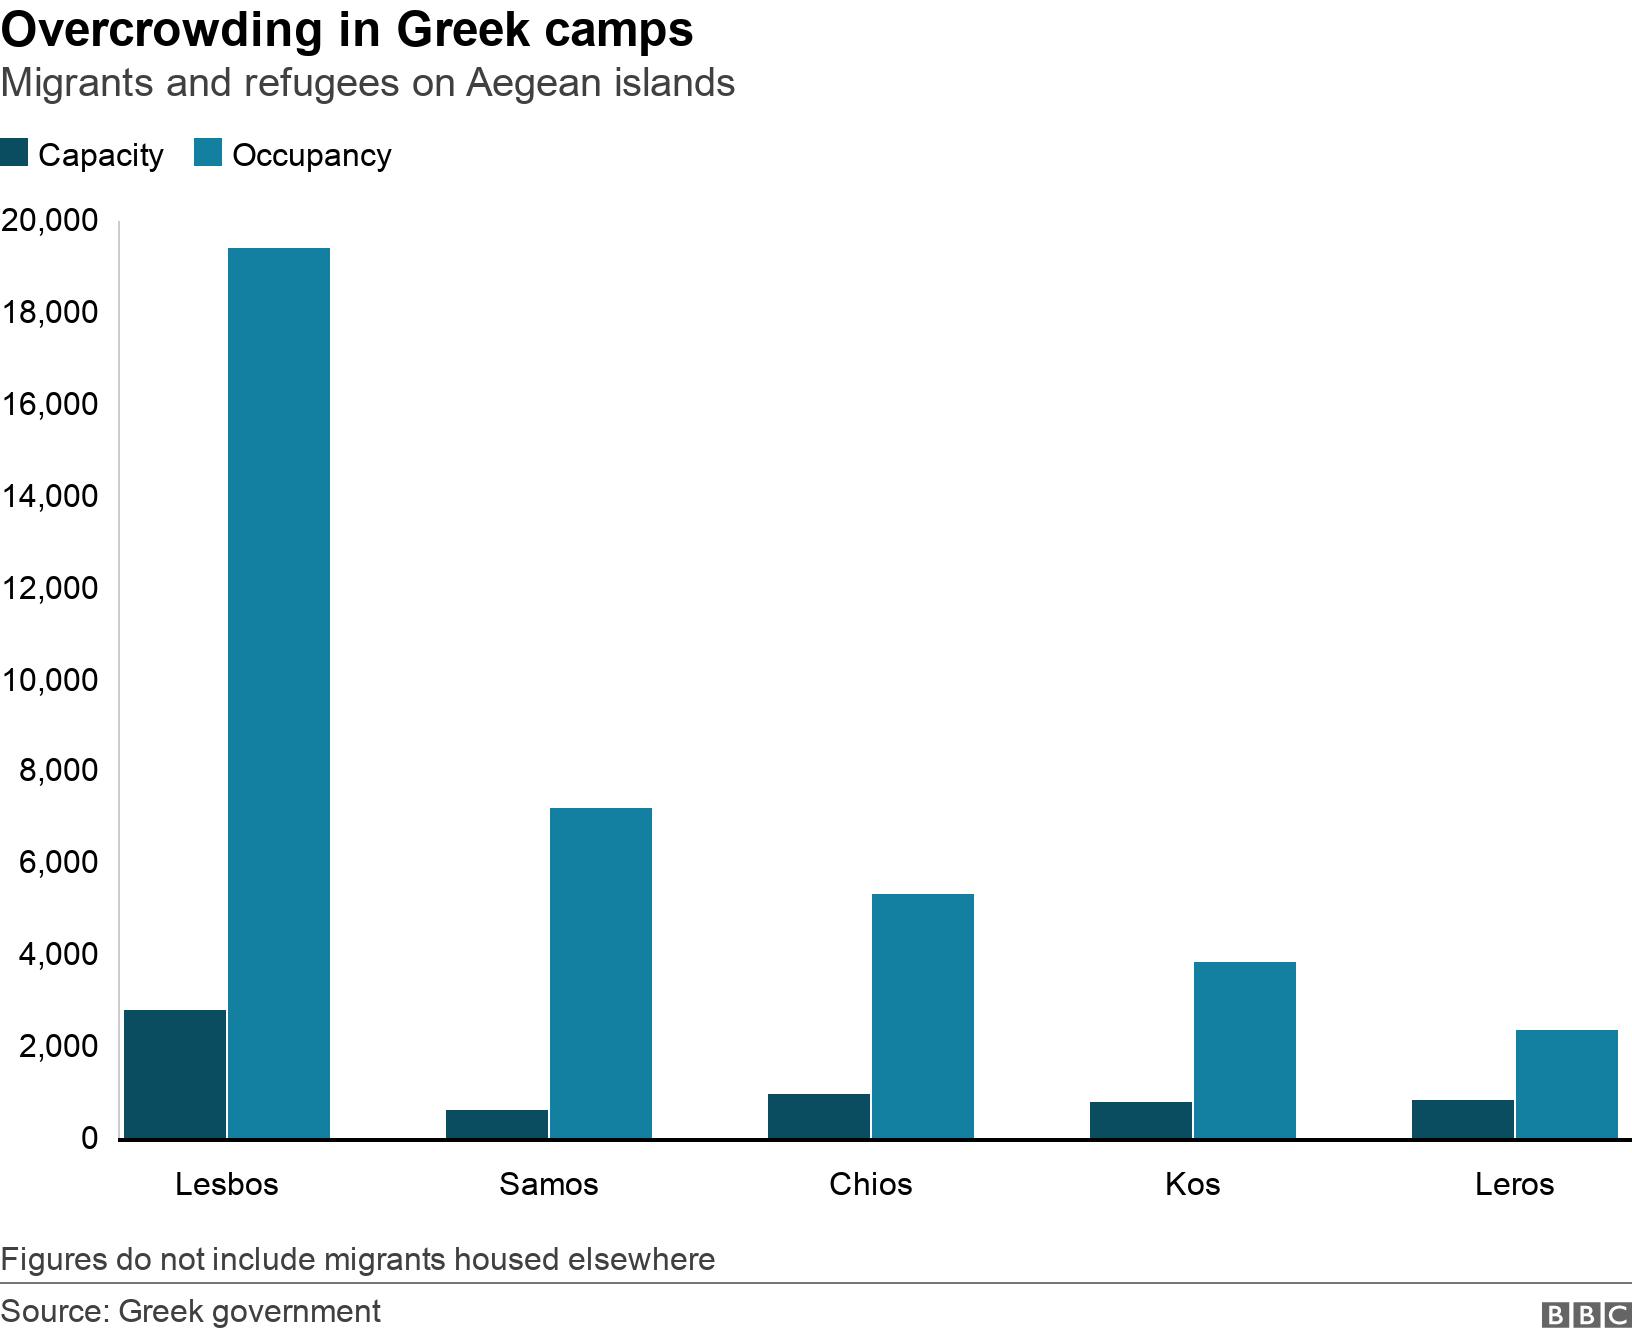 Overcrowding in Greek camps. Migrants and refugees on Aegean islands.  Figures do not include migrants housed elsewhere.